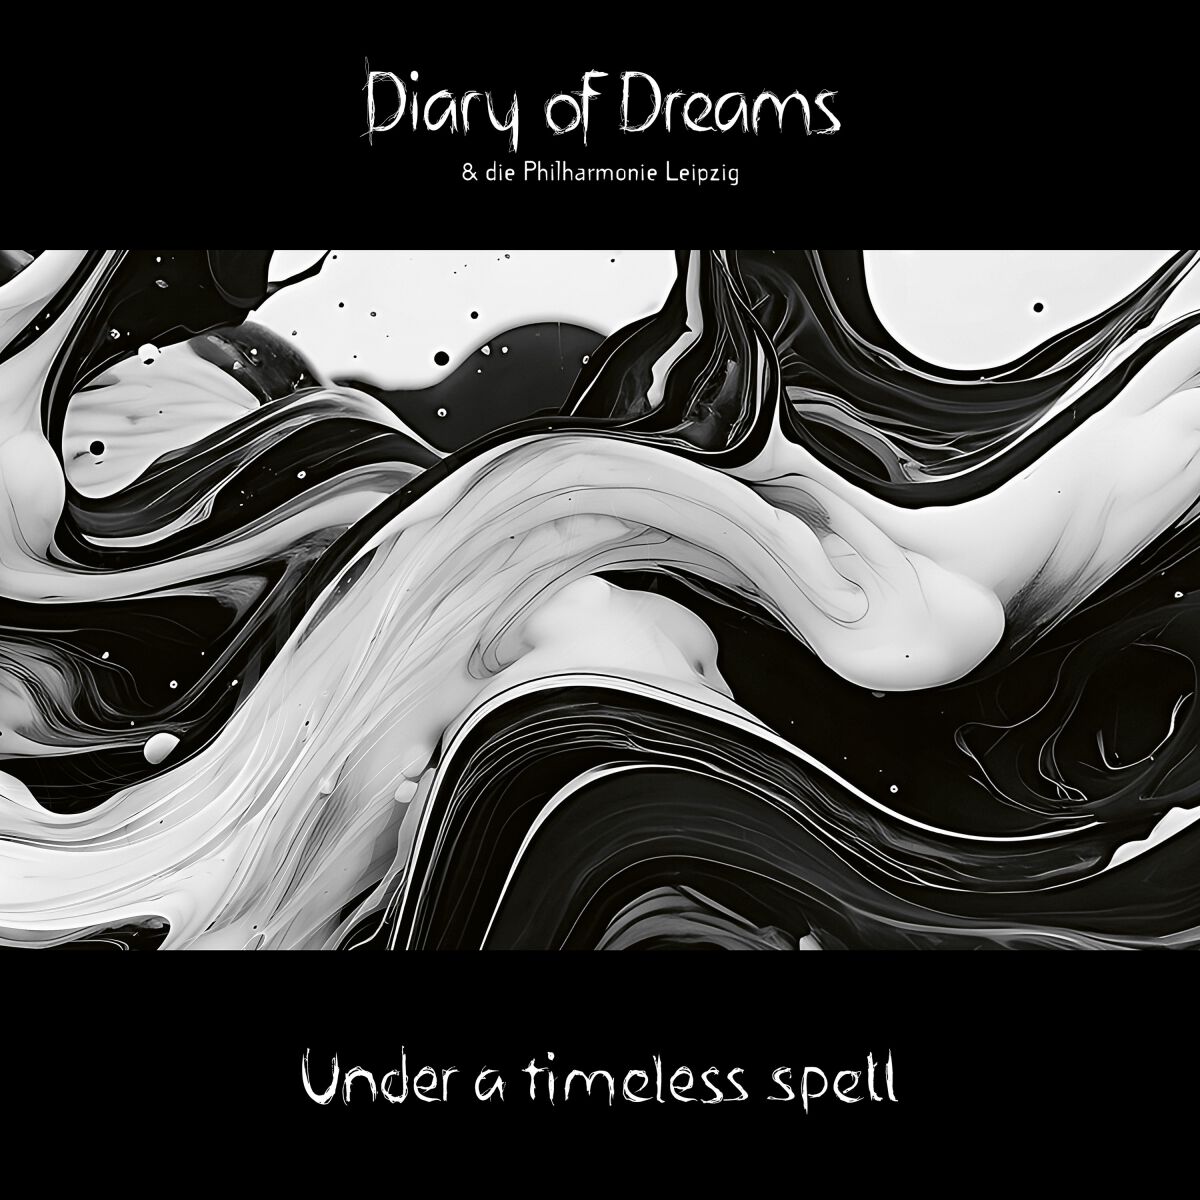 Diary Of Dreams Under a timeless Spell (mit der Philharmonie Leipzig) CD multicolor